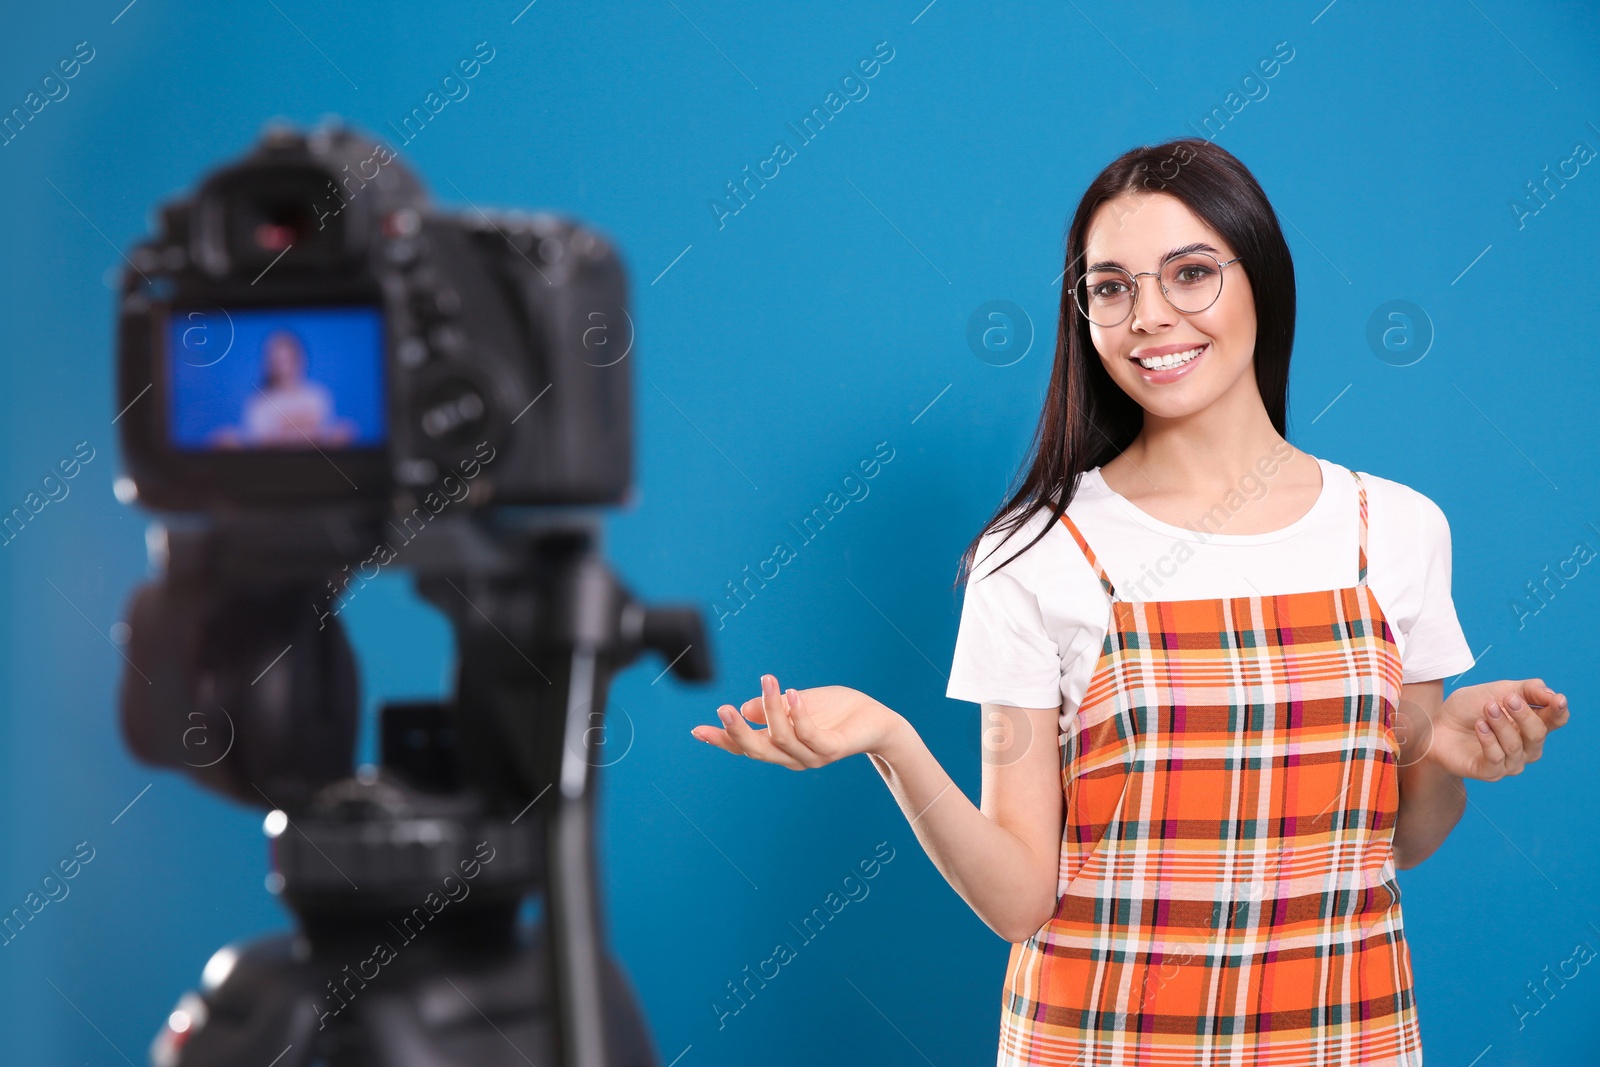 Photo of Young blogger recording video on camera against blue background